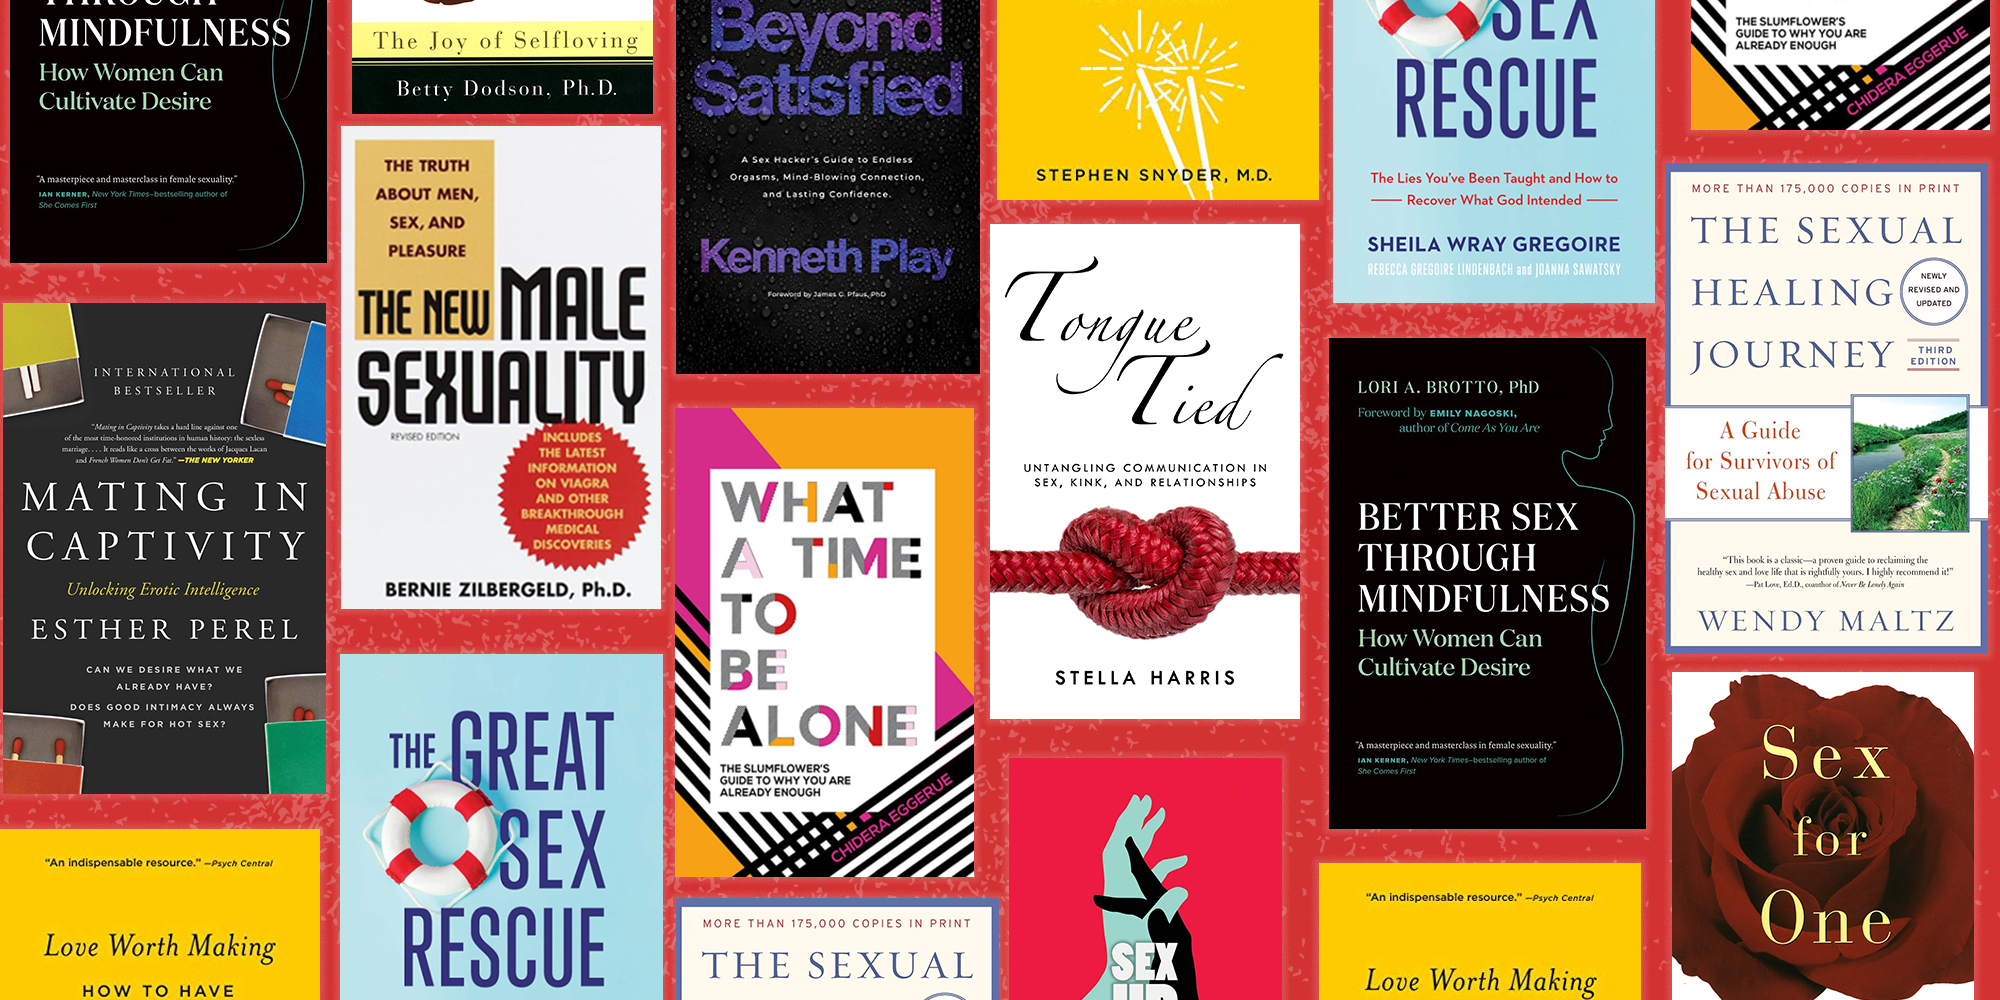 20 Books to Improve Your Sex Life, According to a Sex Therapist